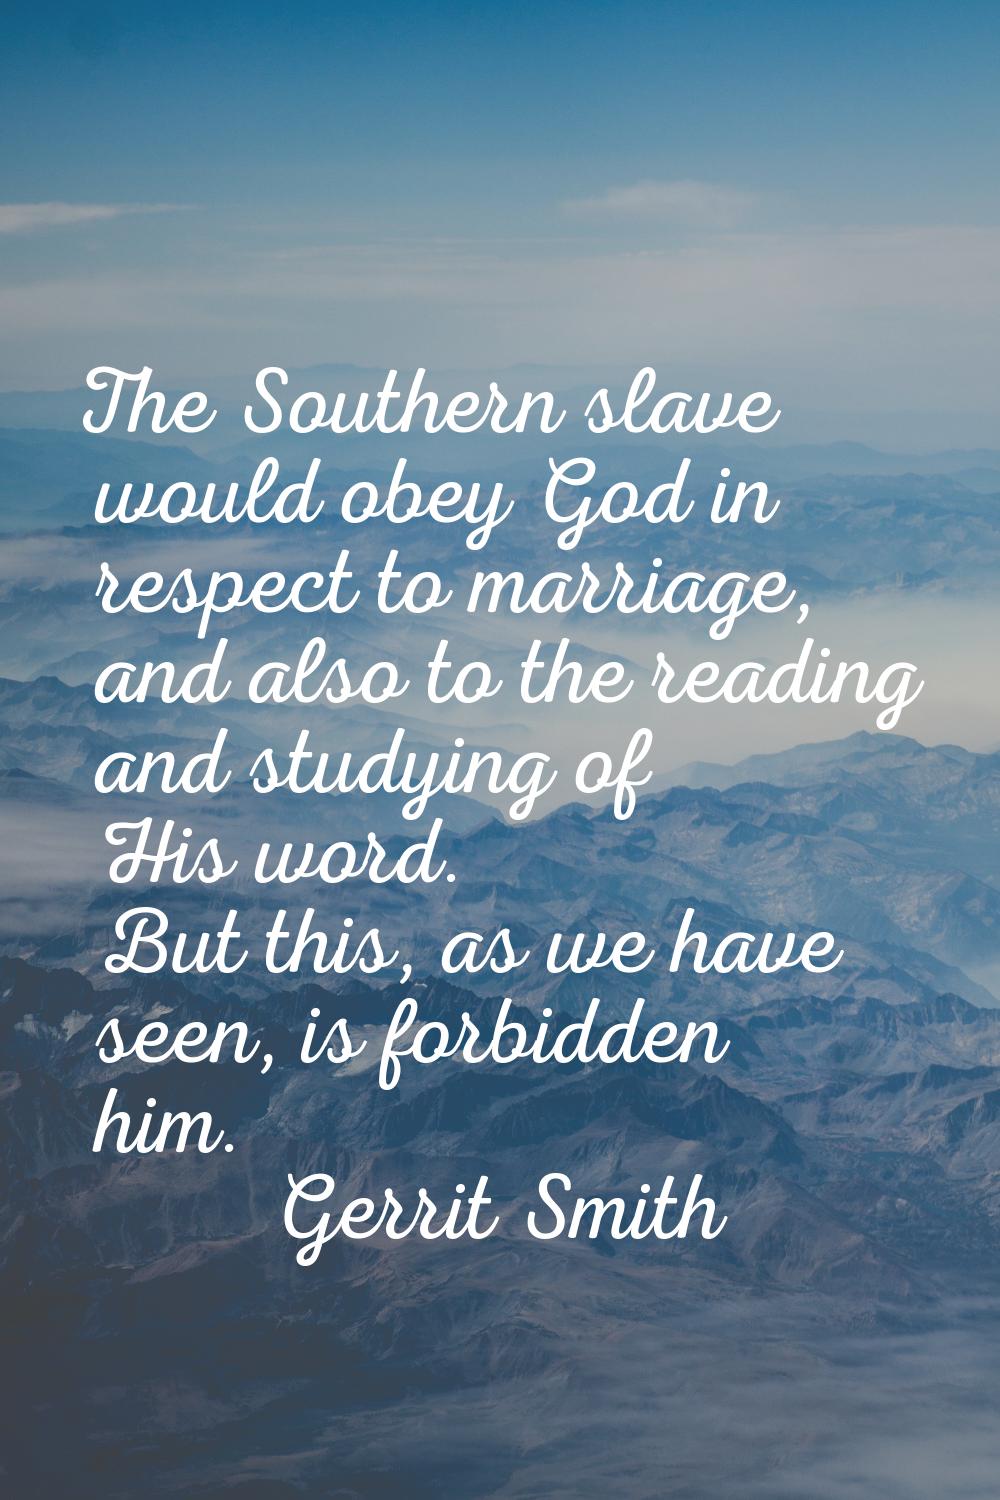 The Southern slave would obey God in respect to marriage, and also to the reading and studying of H